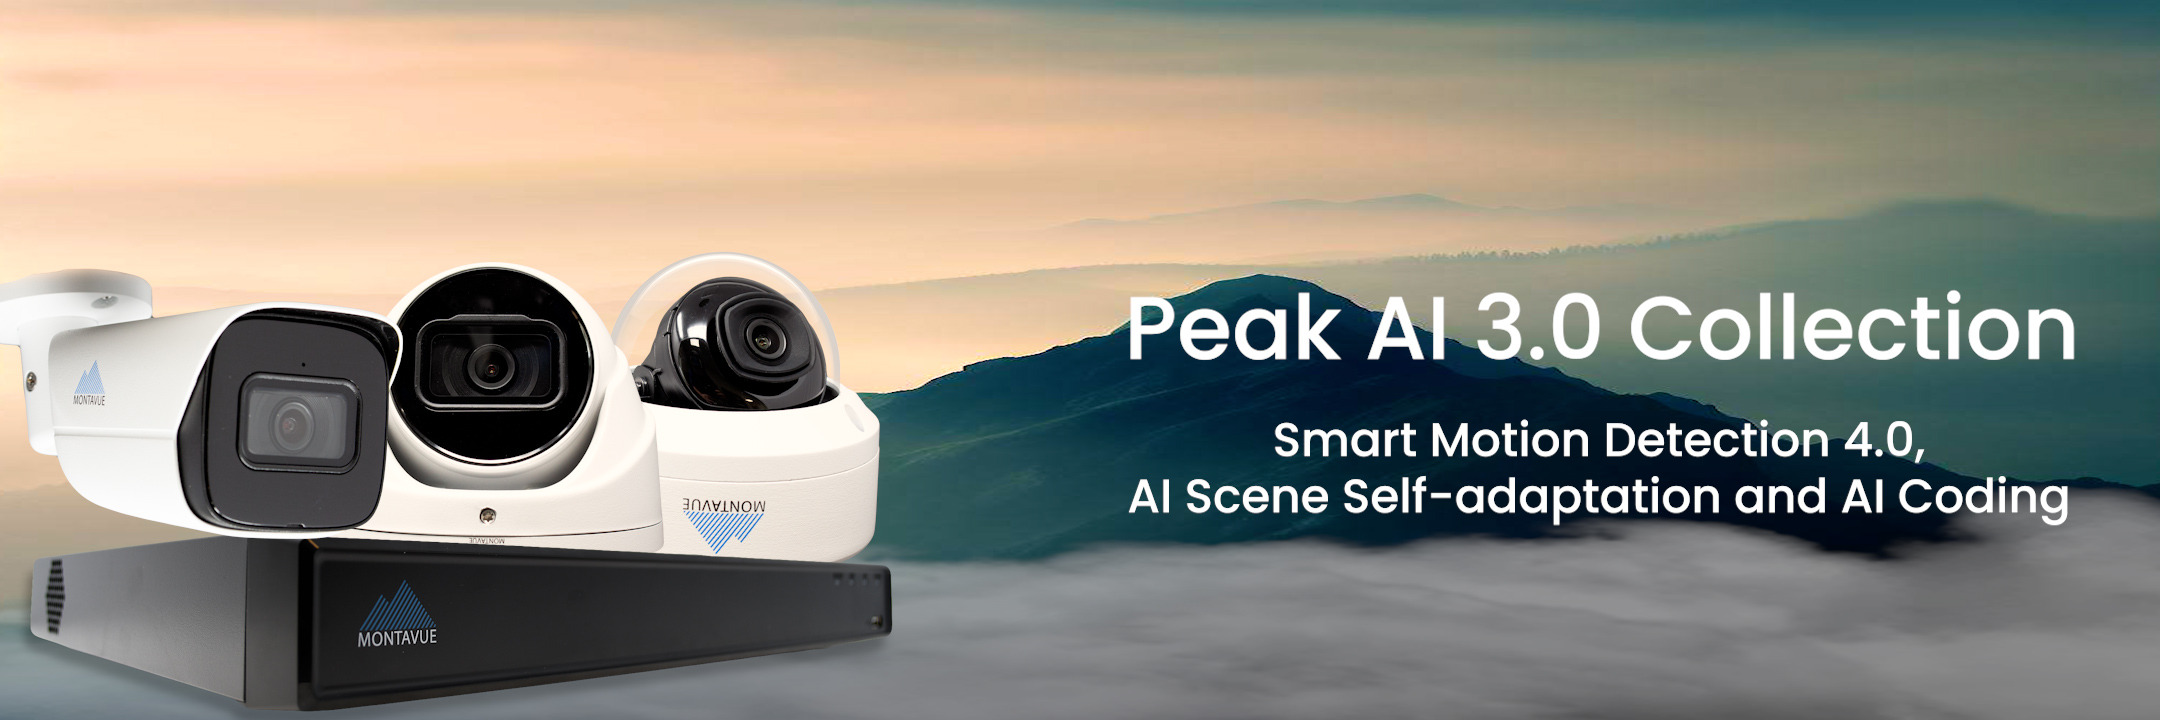 Peak AI series security cameras with smart motion detections and scene self-adaption